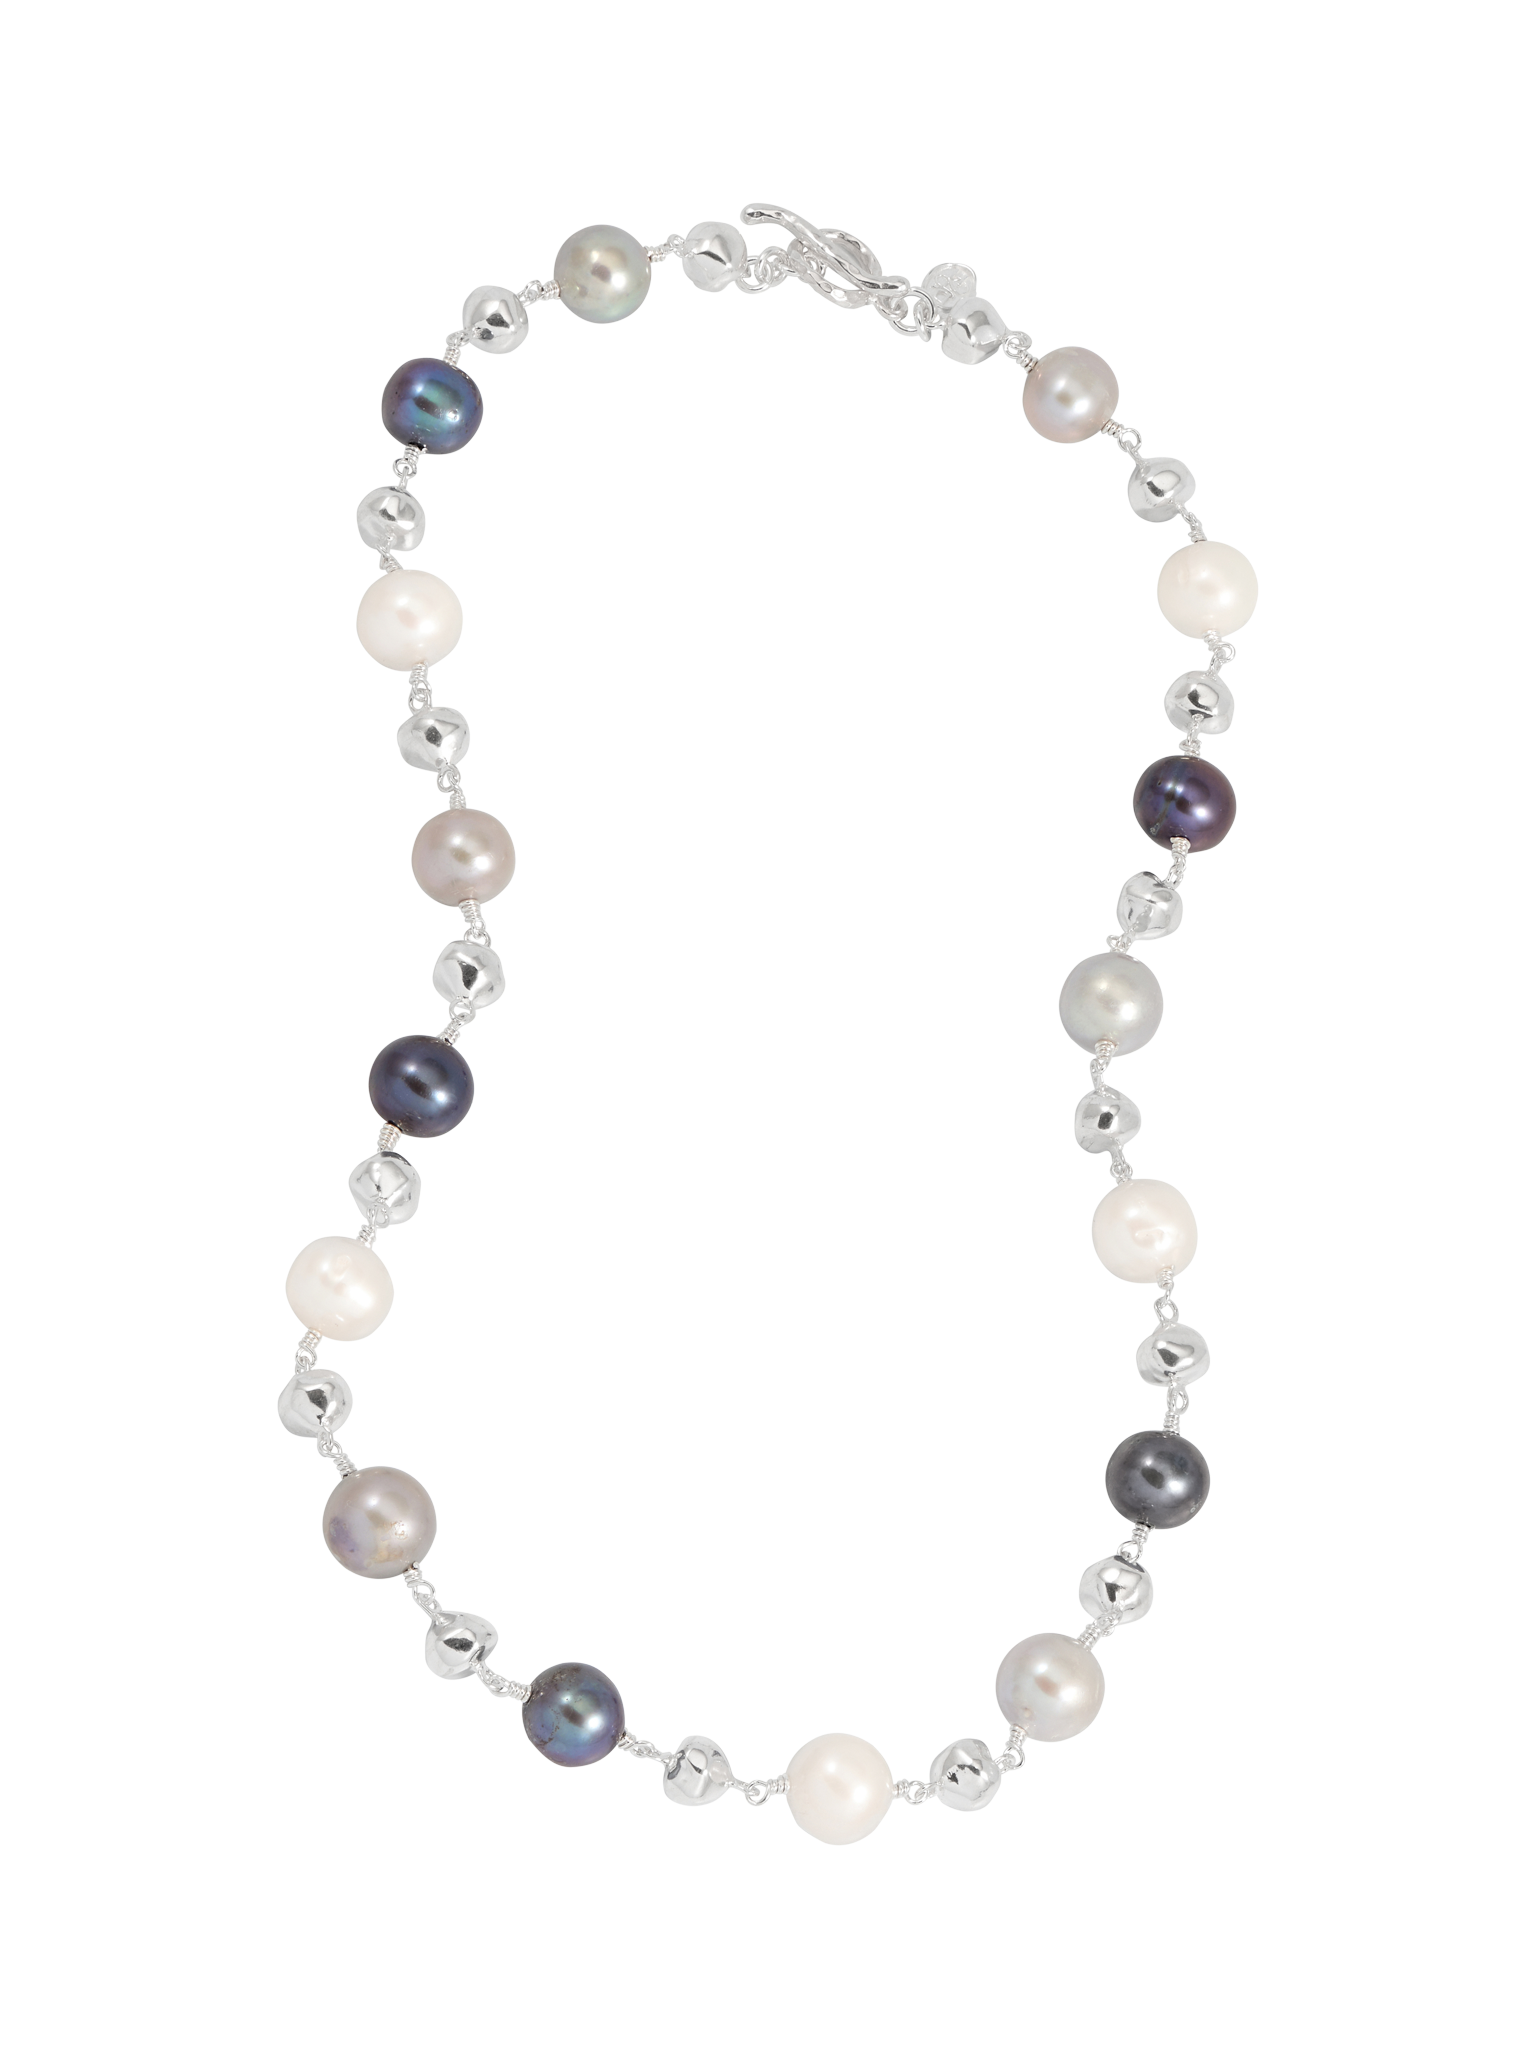 Nugget & mixed freshwater pearl necklace